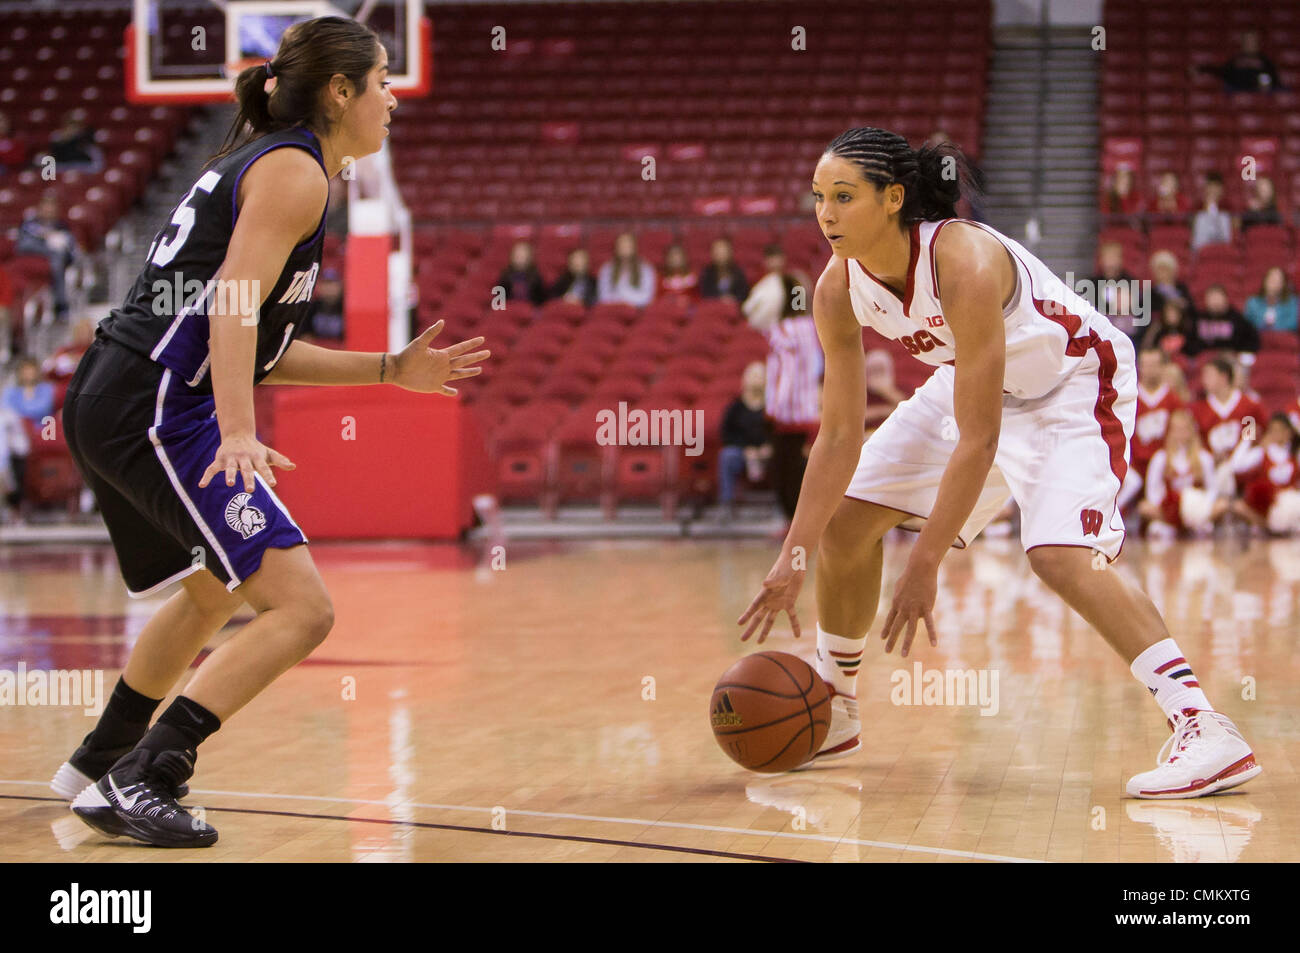 Madison, Wisconsin, USA. 3rd Nov, 2013. November 3, 2013: Wisconsin Badgers guard Taylor Wurtz #2 dribbles out top of the three point line during the NCAA Exhibition Basketball game between Winona State Warriors and the Wisconsin Badgers. The Badgers defeated the Warriors 80-49 at the Kohl Center in Madison, WI. John Fisher/CSM/Alamy Live News Stock Photo